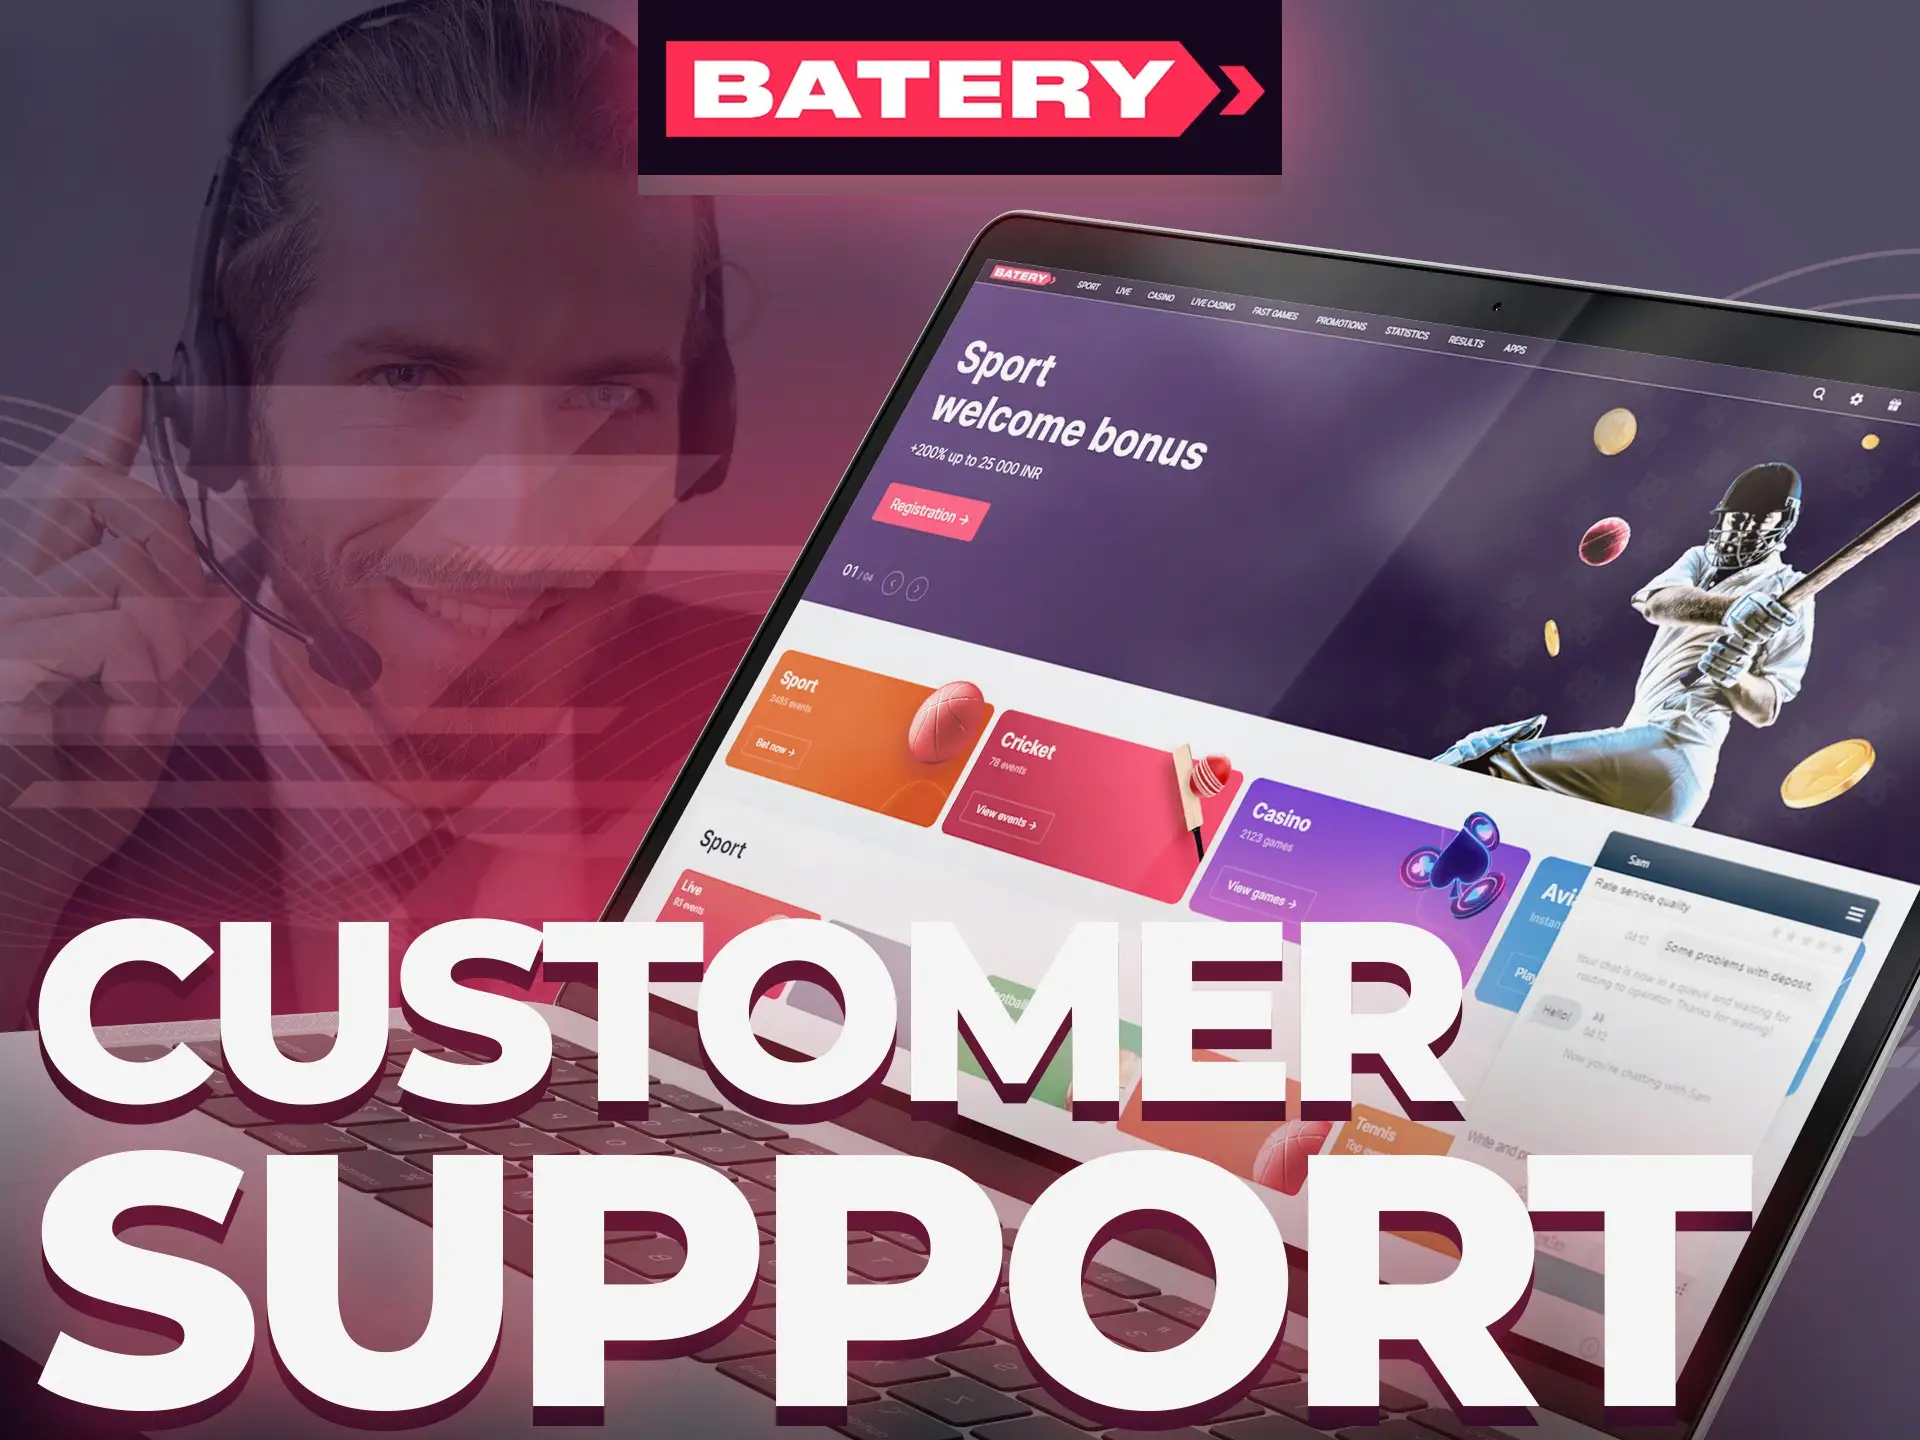 Batery customer support can help you with any question.